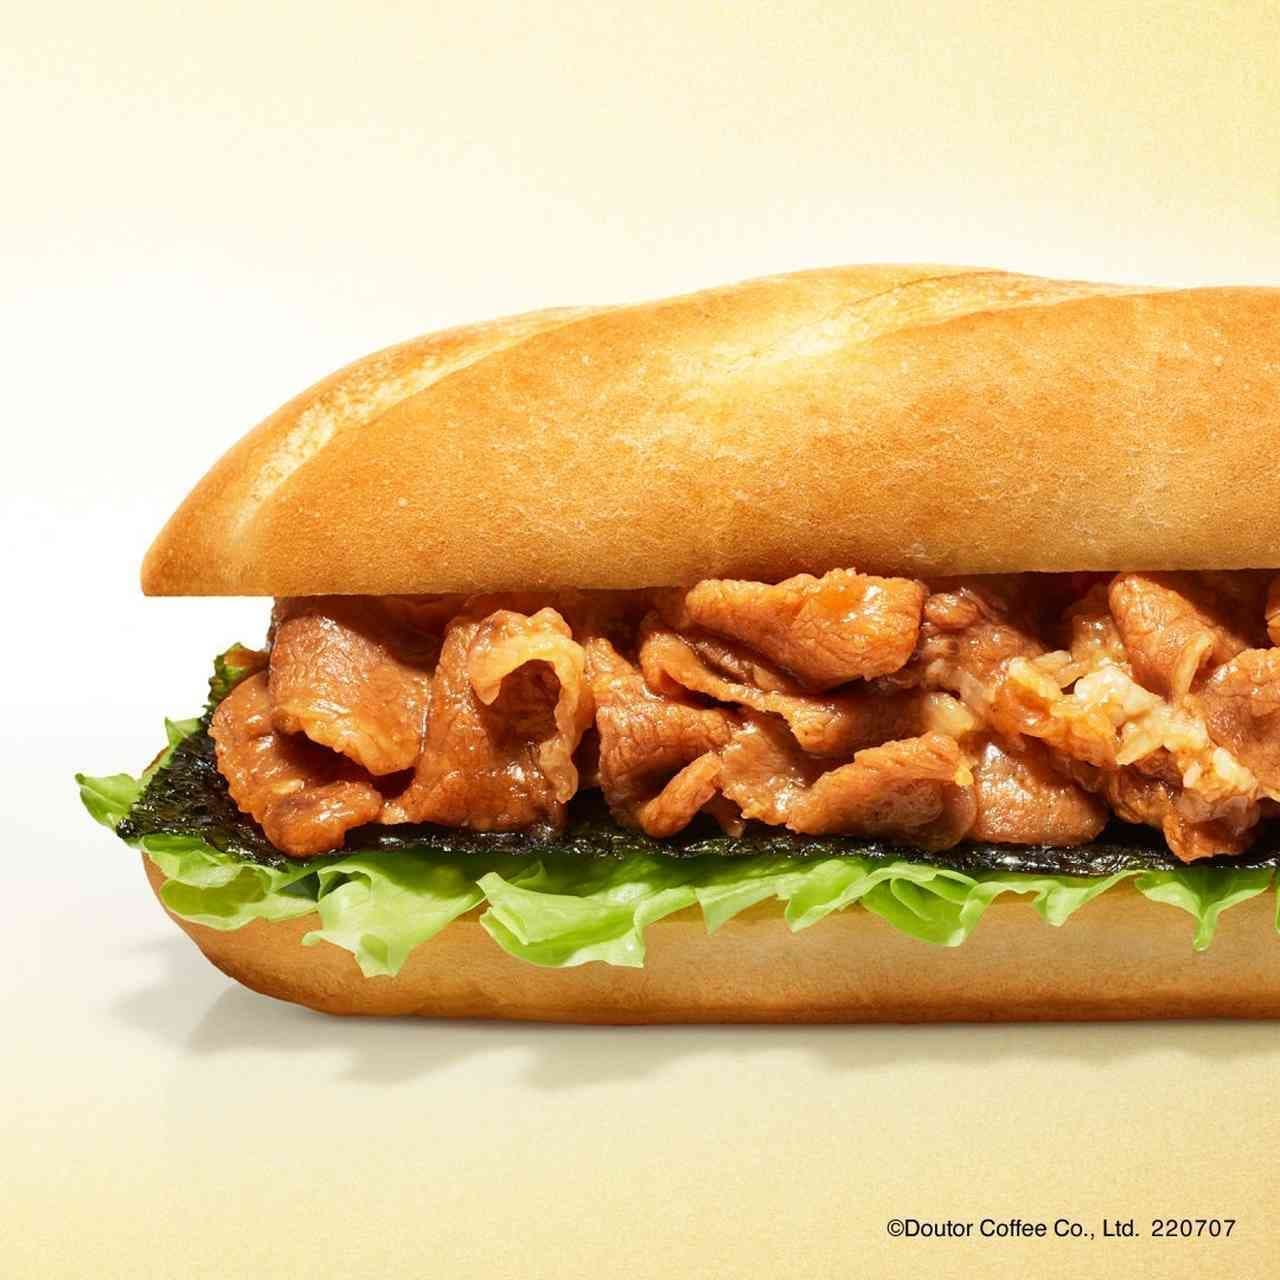 Doutor "Limited Time Milano Sandwich Beef Kalbi".